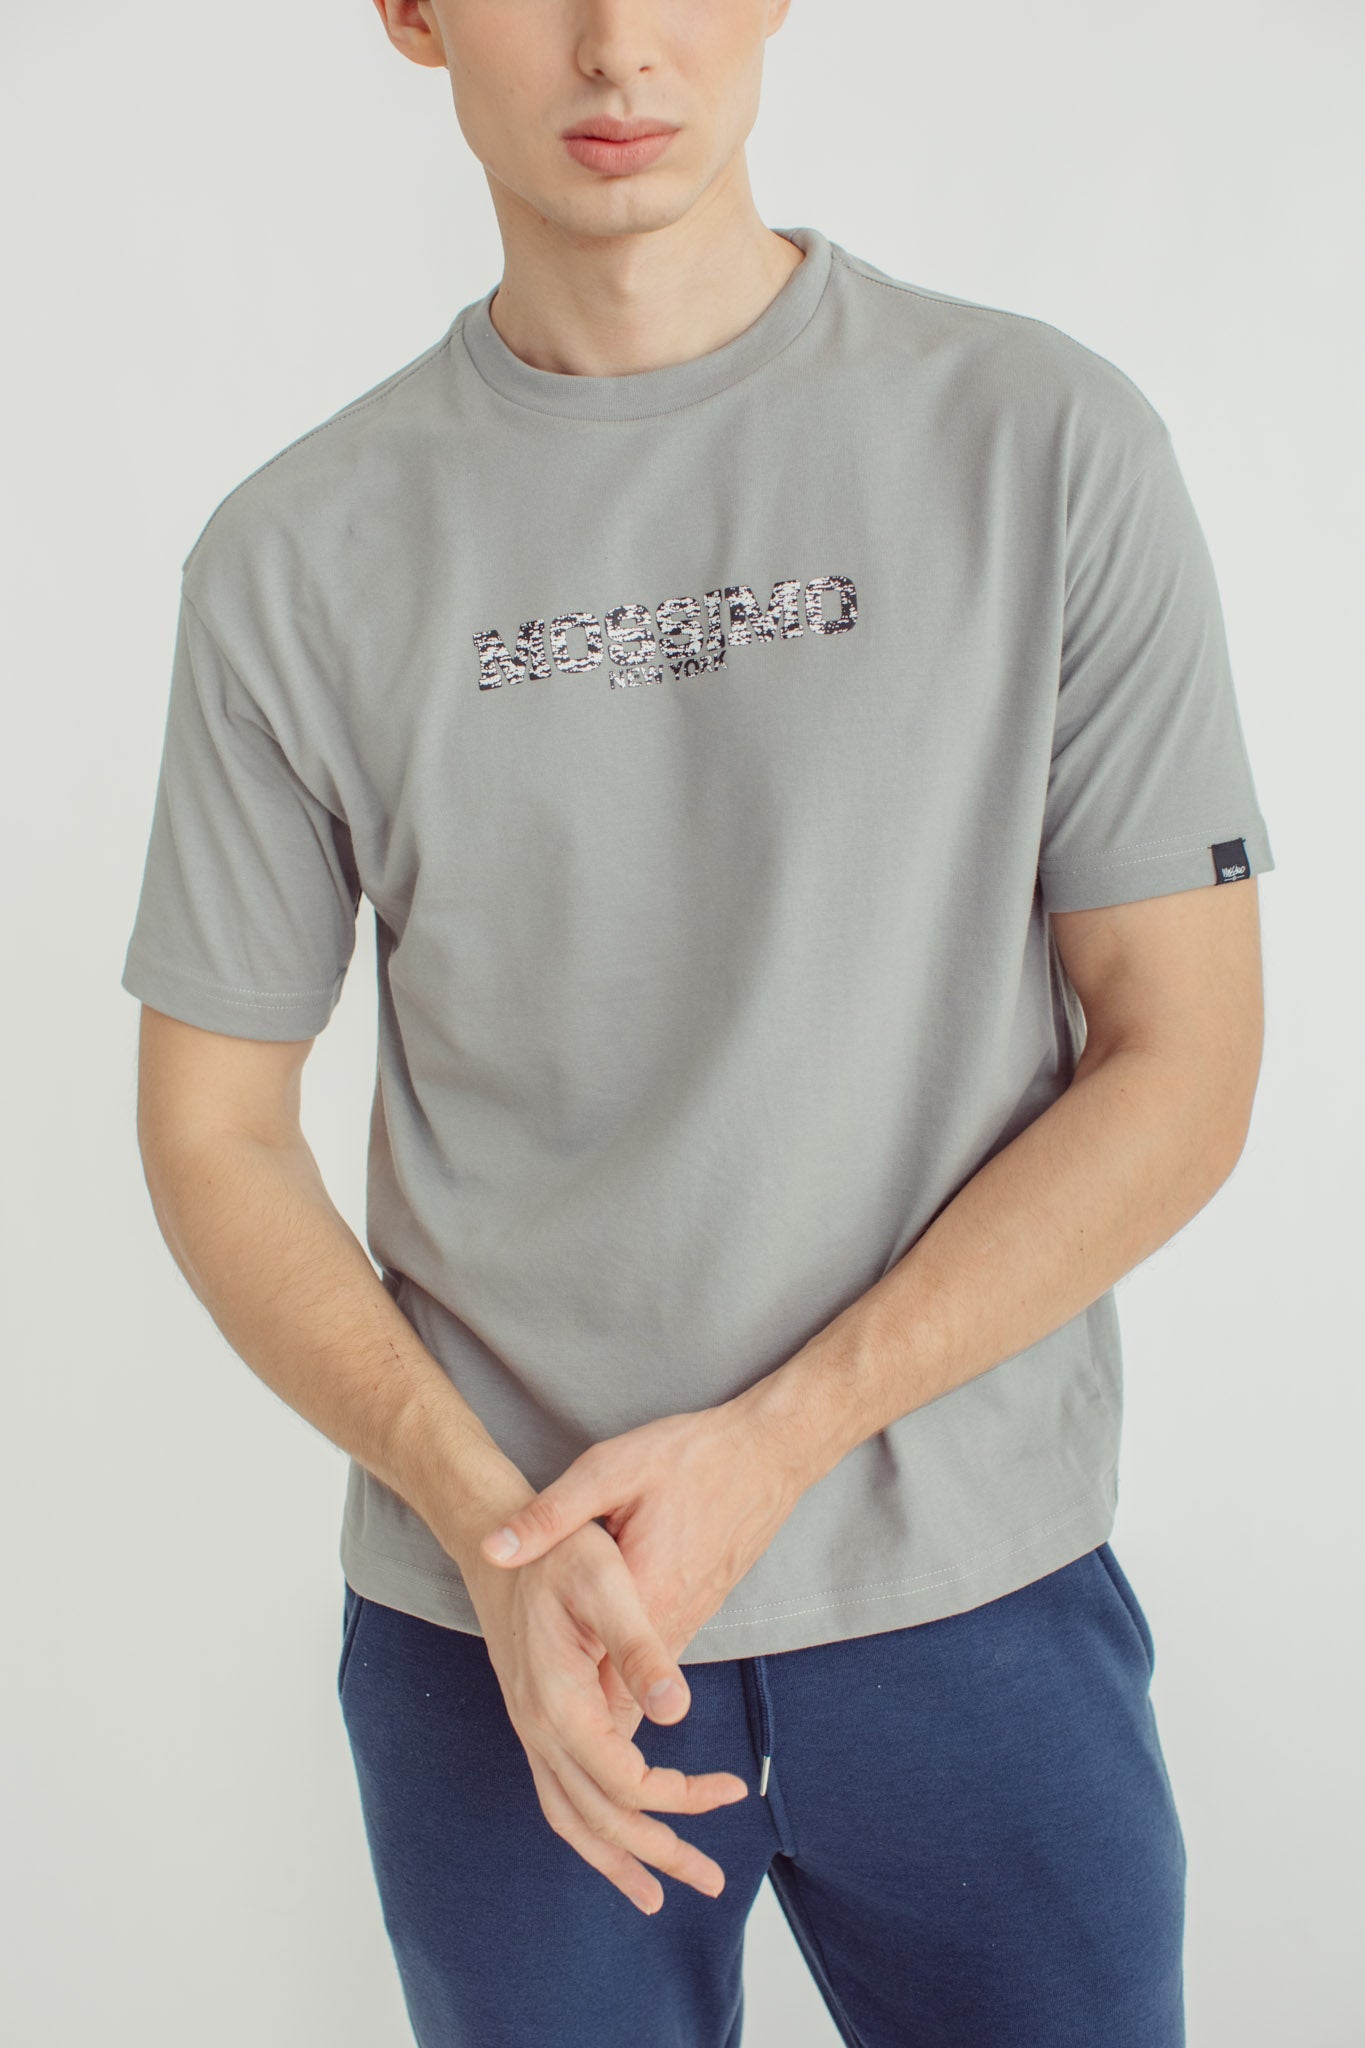 Basic Round Neck with Embossed Print Urban Fit Tee - Mossimo PH